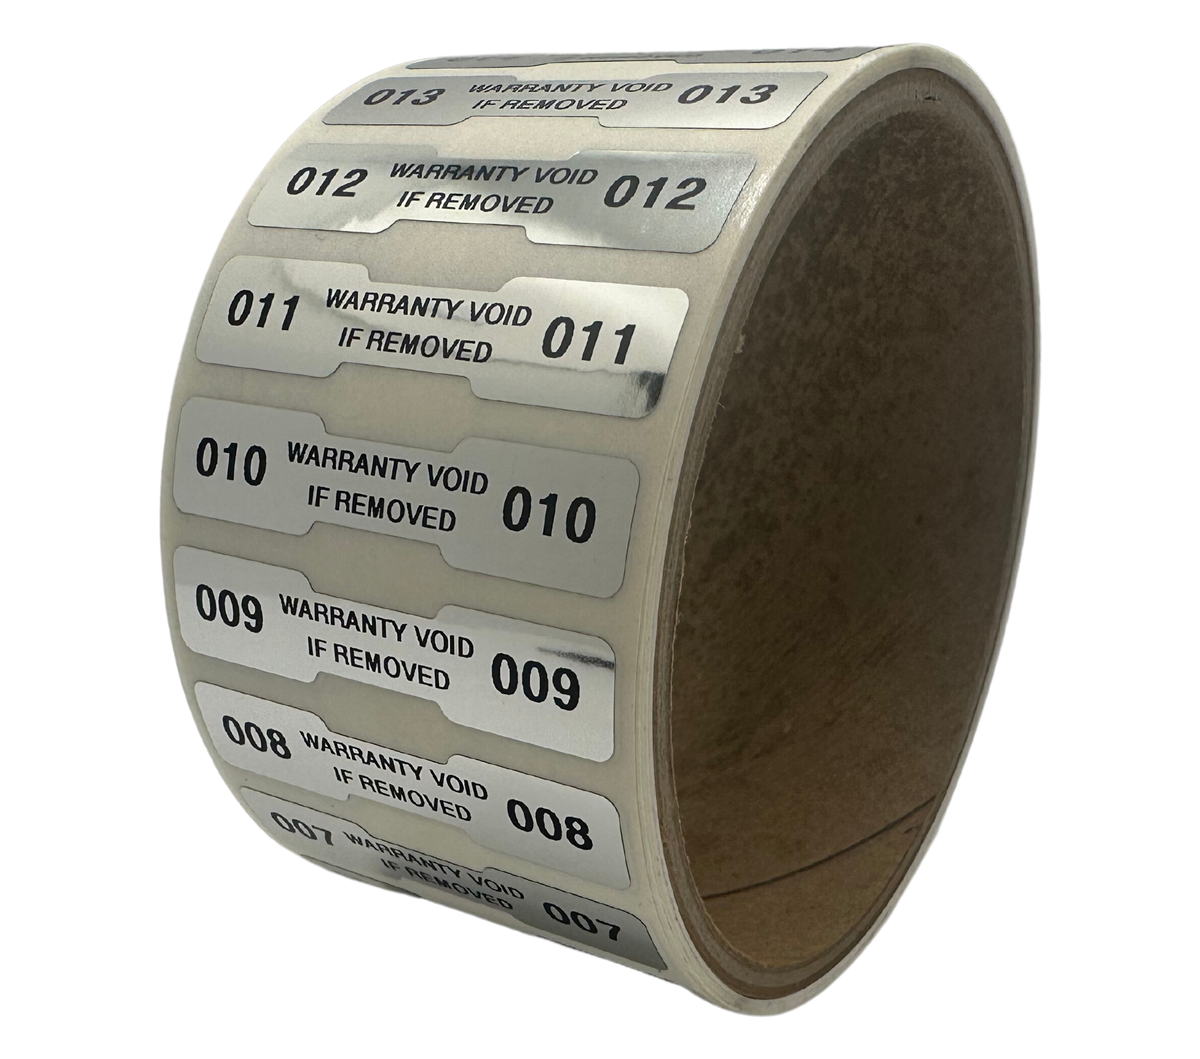 5,000 Finish Tamper Evident Metallic Silver / Chrome Non Residue Security Labels TamperGuard® Seal Sticker, Dogbone 1.75" x 0.375" (44mm x 9mm). Printed: Warranty Void if Removed + Serialized